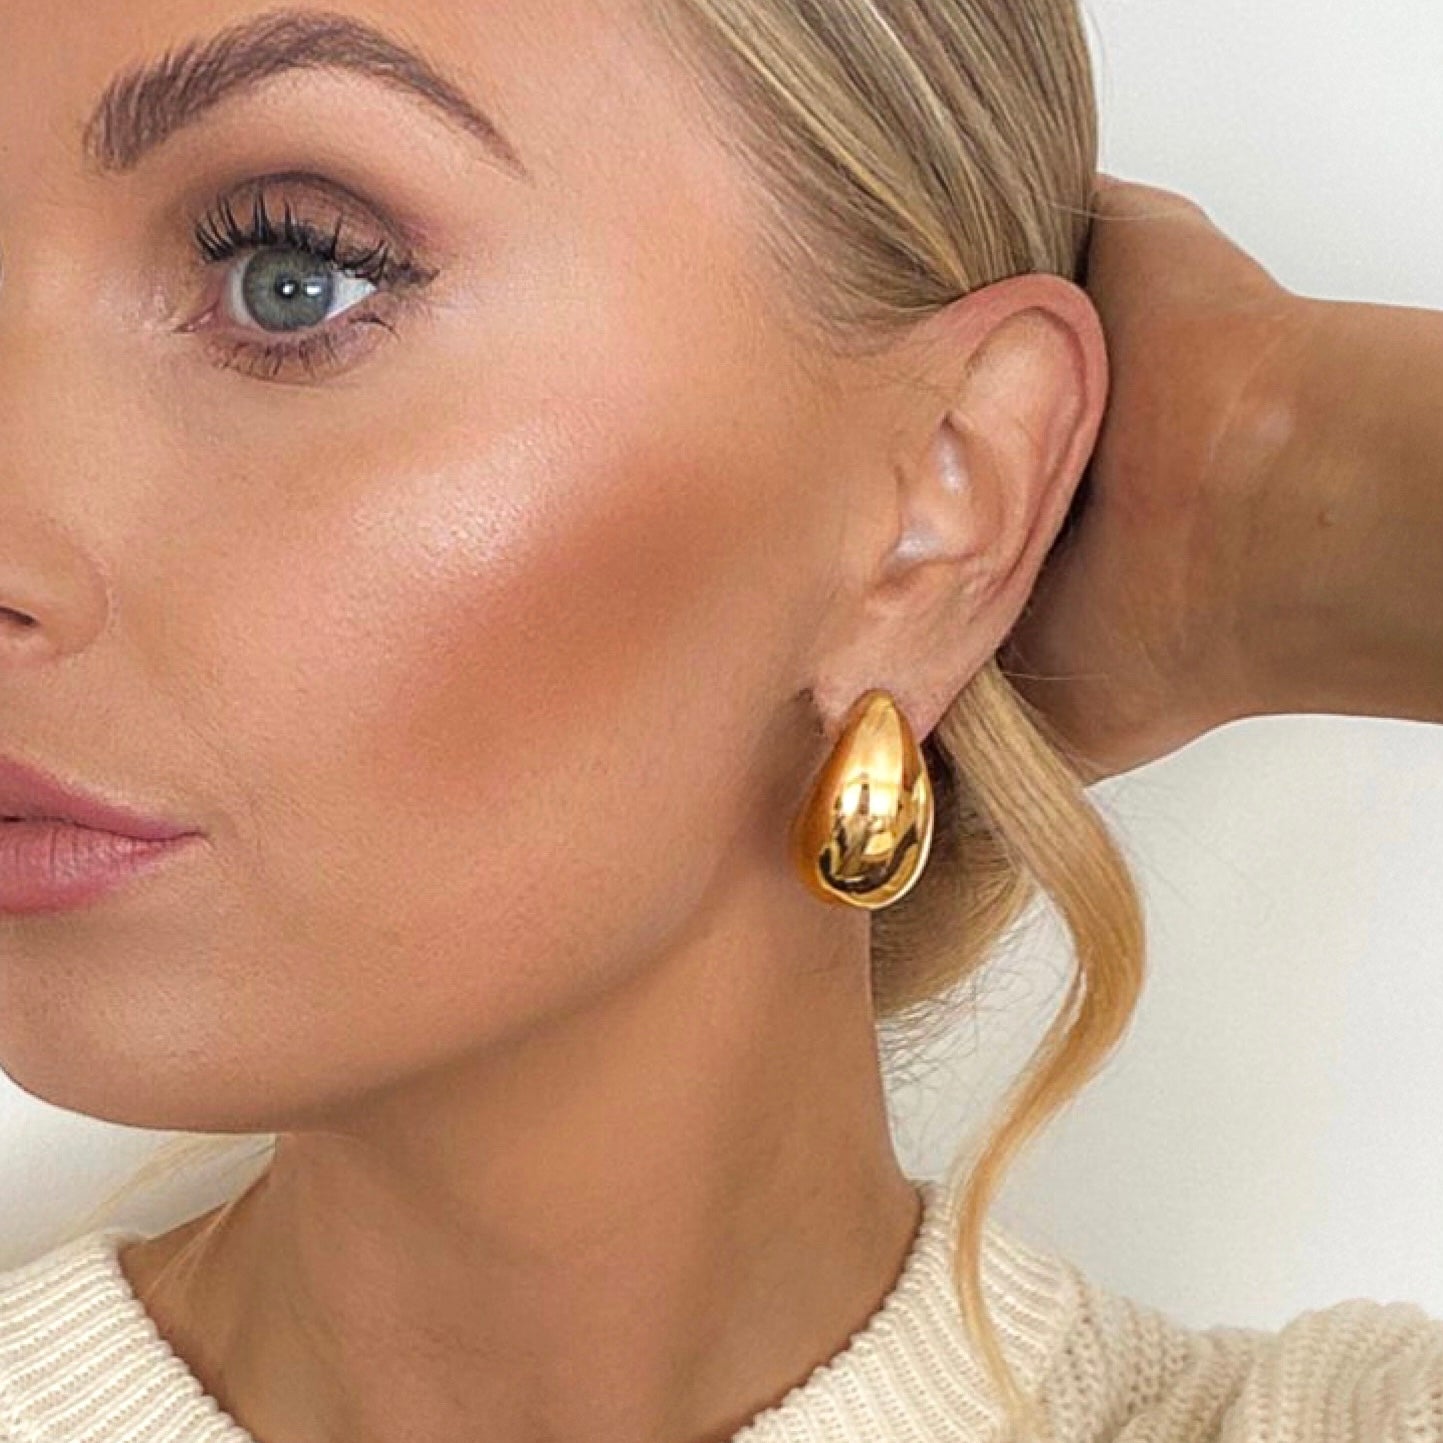 Smooth Gold Waterdrop, teardrop earrings that have been spotted on hailey beiber and the kardashians. A celebrity favourite, these earrings went viral on tiktok. Made from Stainless Steel and 18k Gold PVD Plating they are tarnish free, waterproof and hypoallegenic.